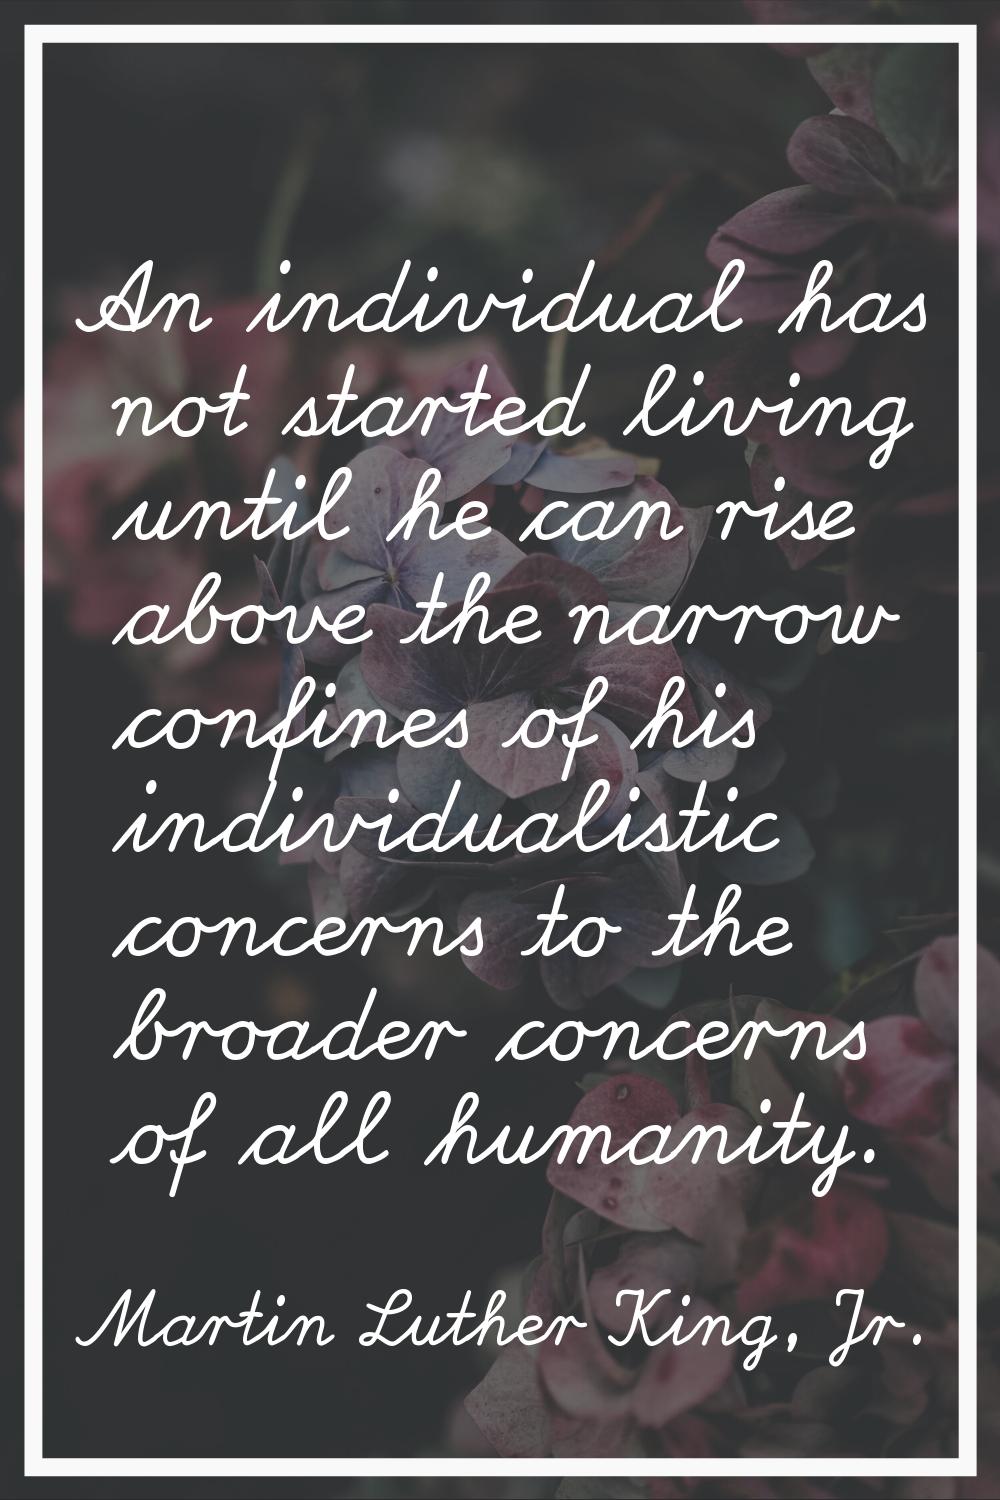 An individual has not started living until he can rise above the narrow confines of his individuali